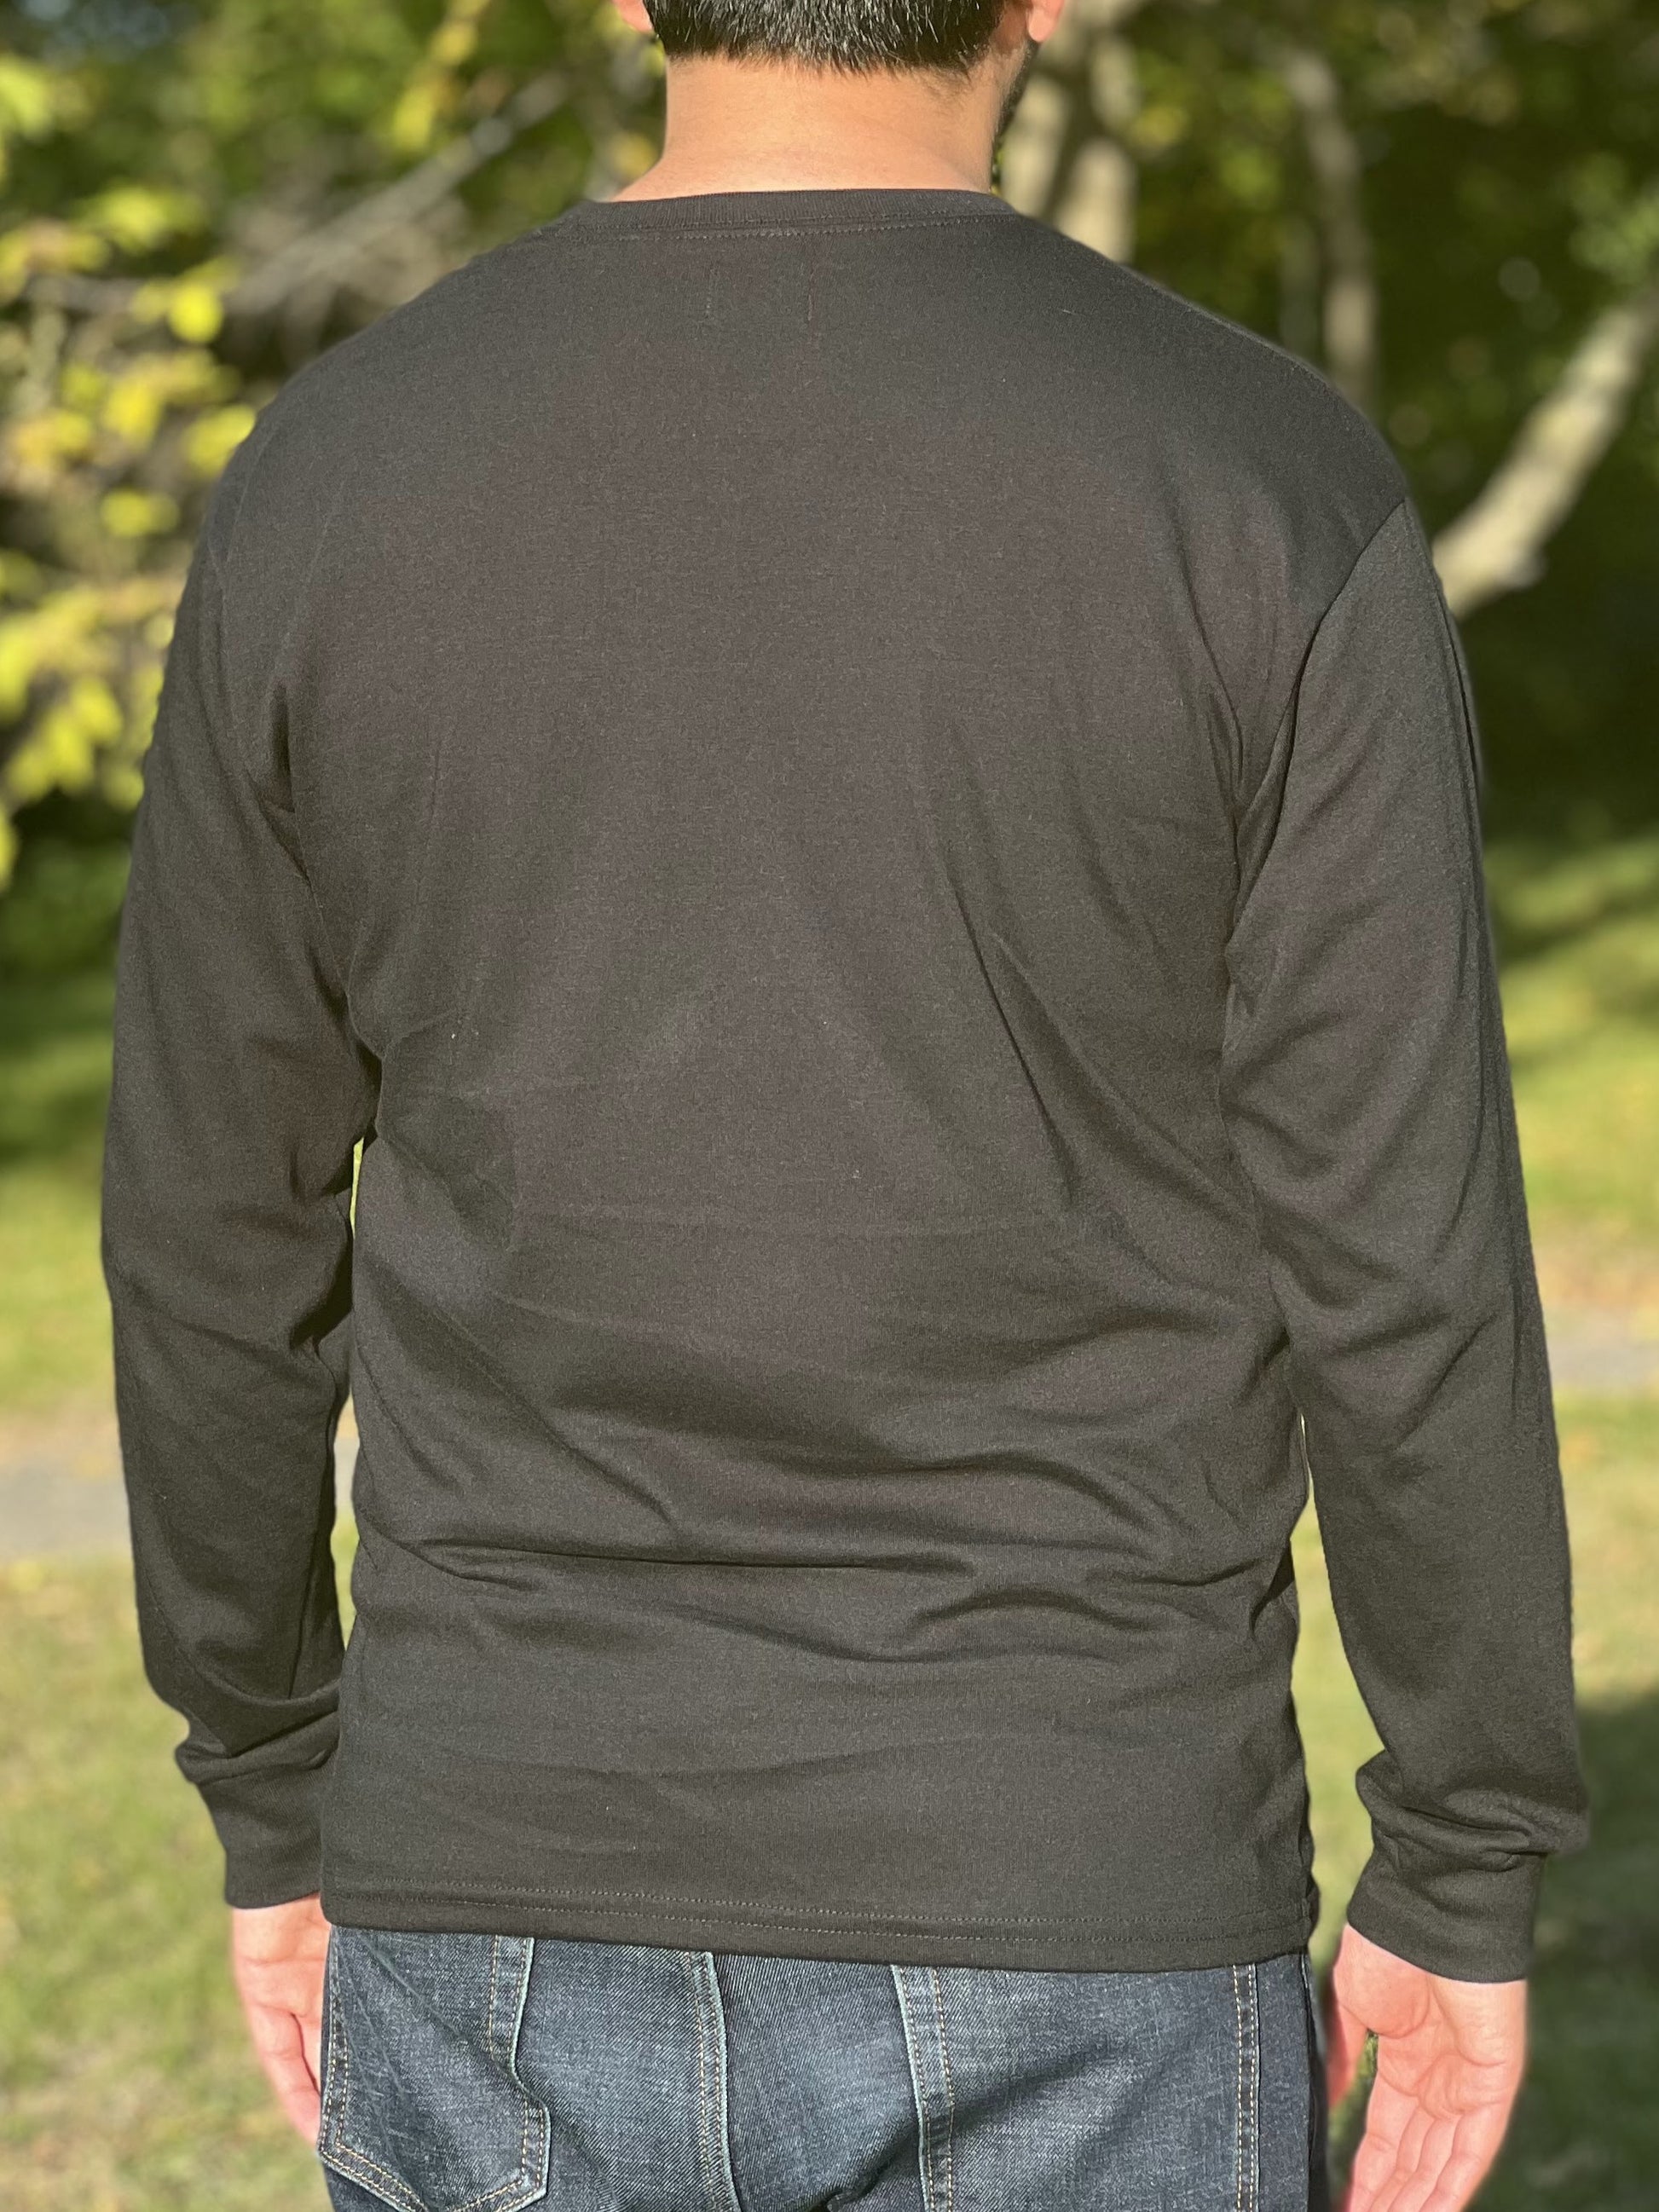 Back view of a man wearing a long-sleeved black t-shirt.